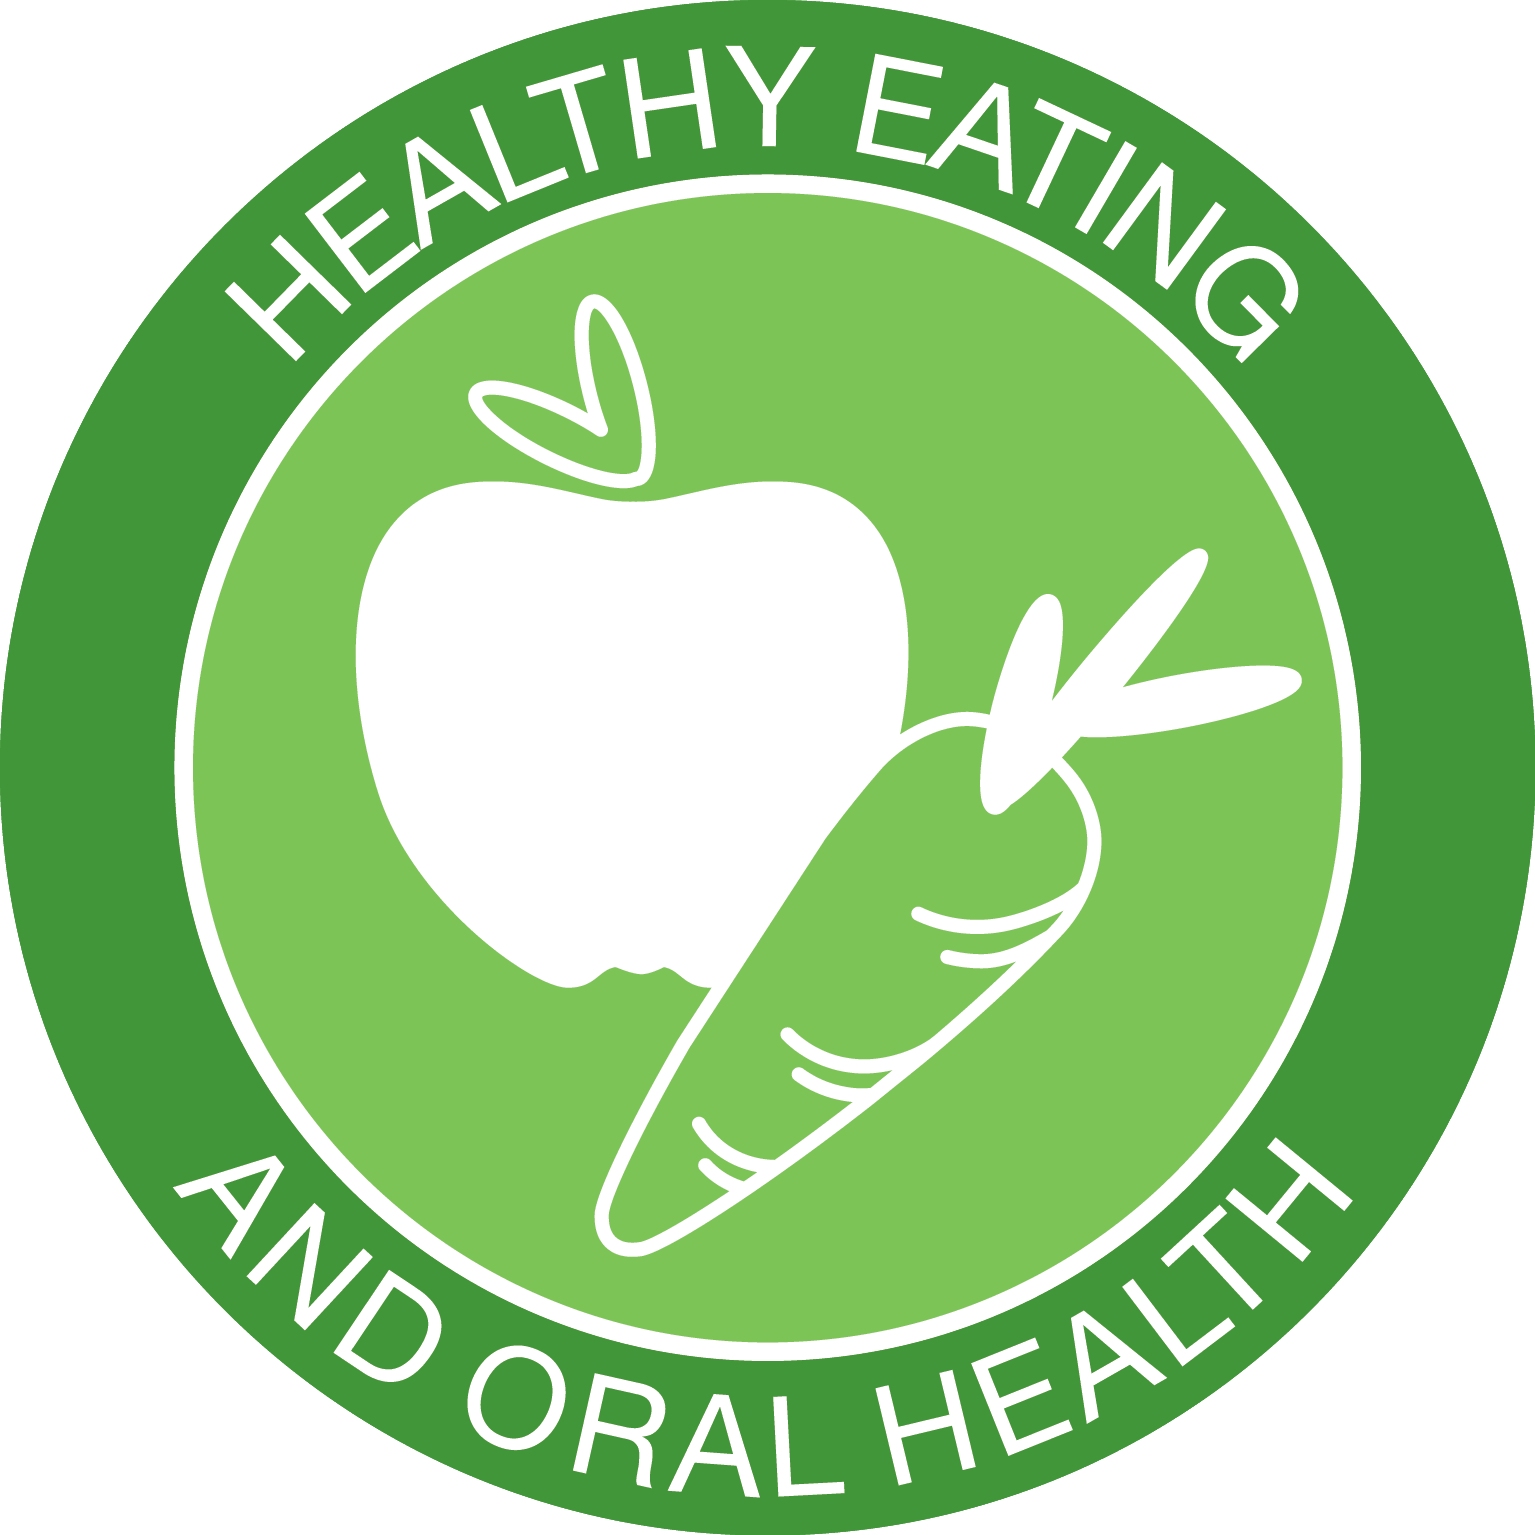 Health Food Icon - Healthy Eating And Oral Health (1535x1535)